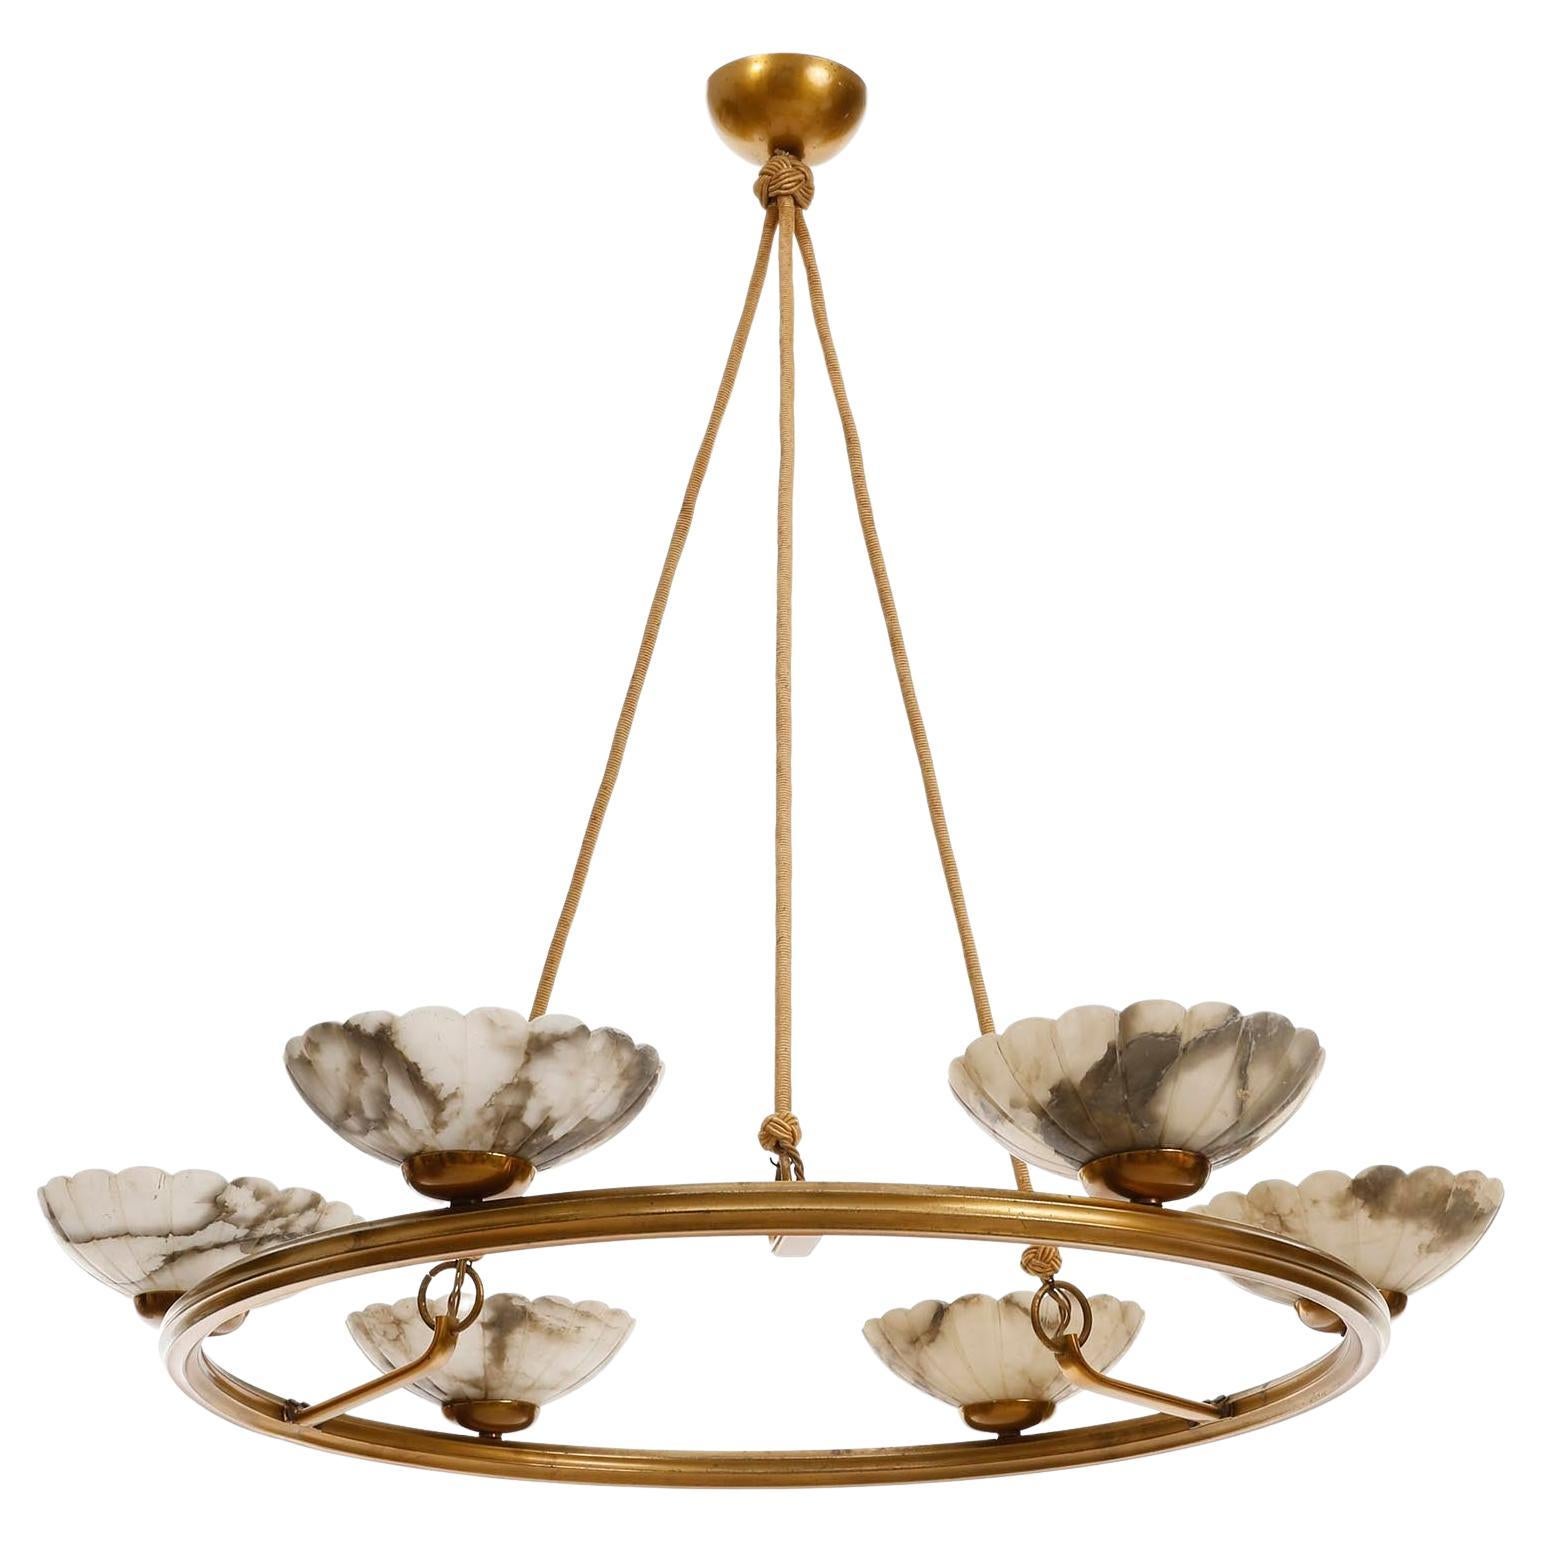 A large and gorgeous Art Deco pendant chandelier manufactured in Sweden, circa 1930.
It is made of a patinated brass or bronze ring with six engraved and polished Alabaster lamp shade bowls.
The alabaster bowls have a wonderful texture and